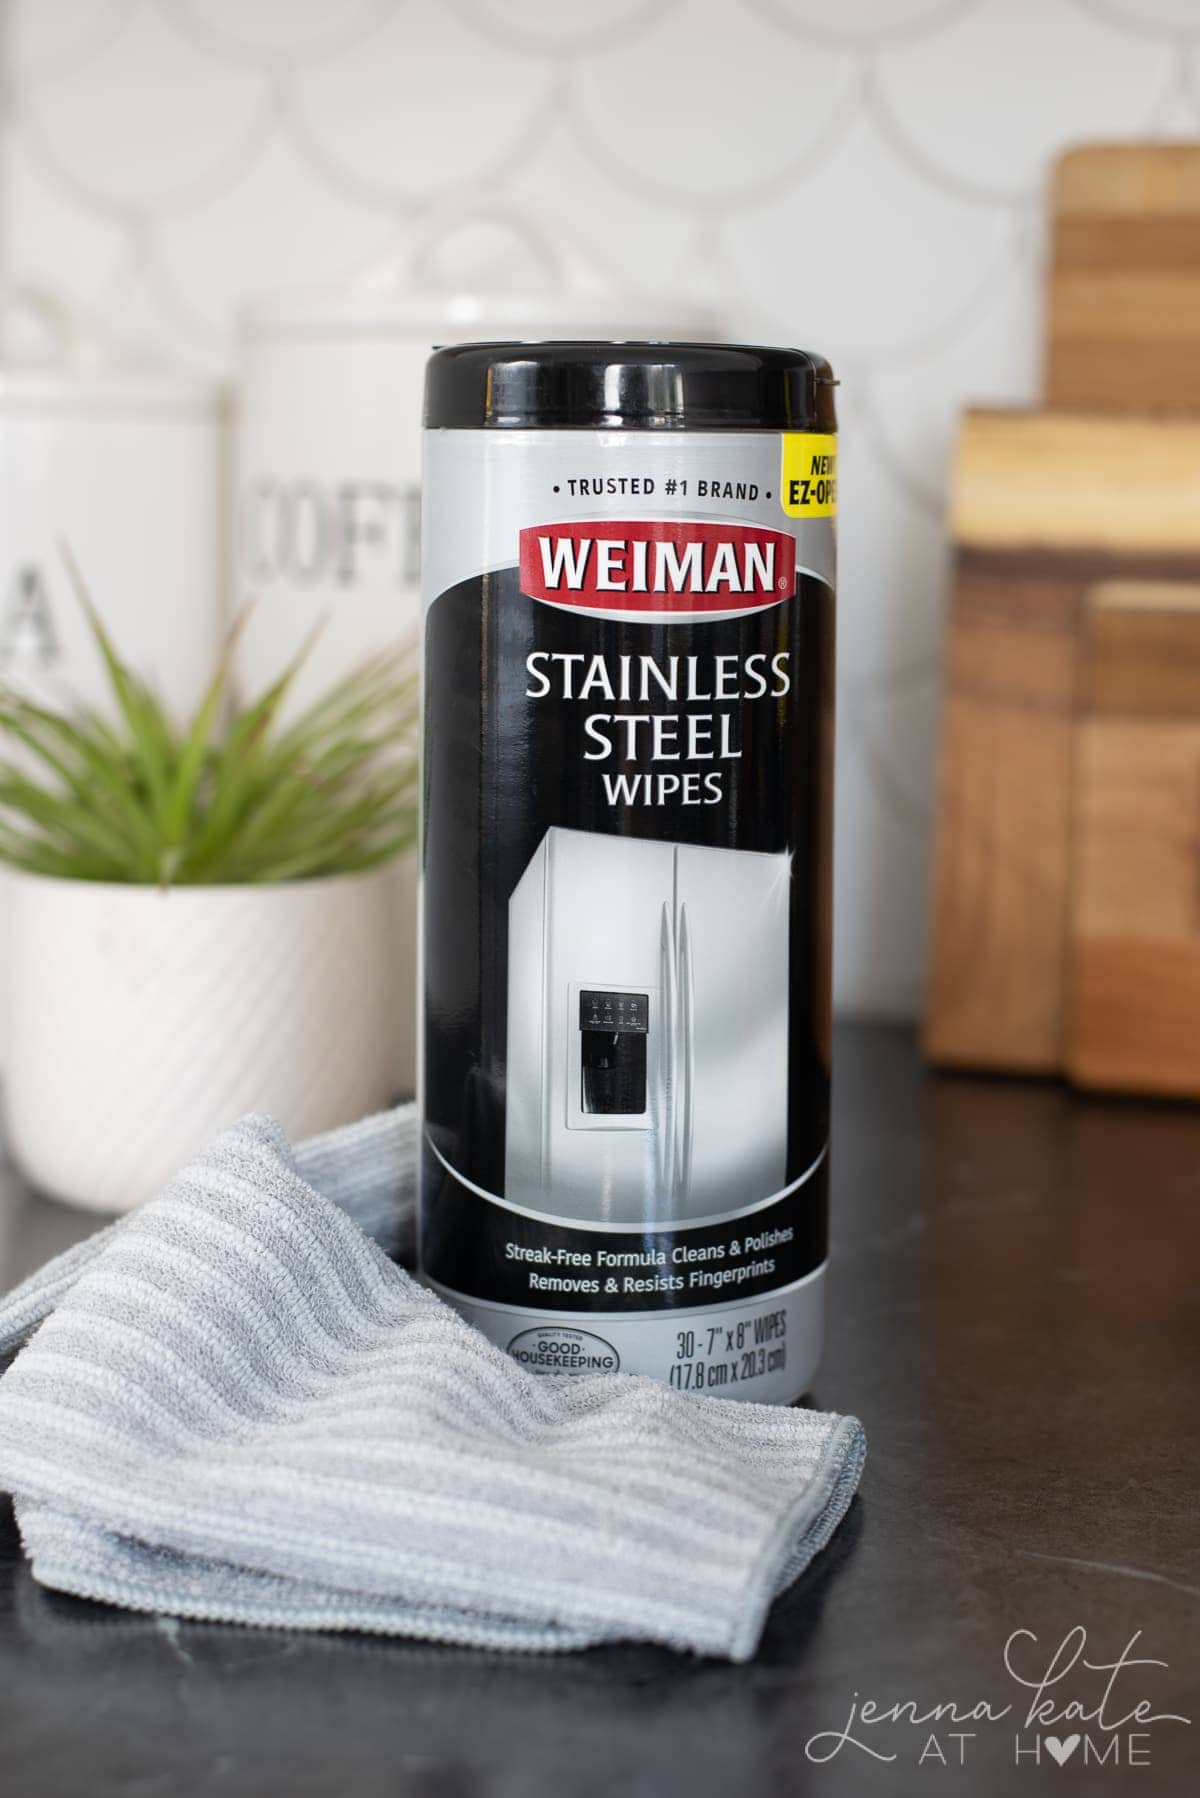 Weiman stainless steel wipes